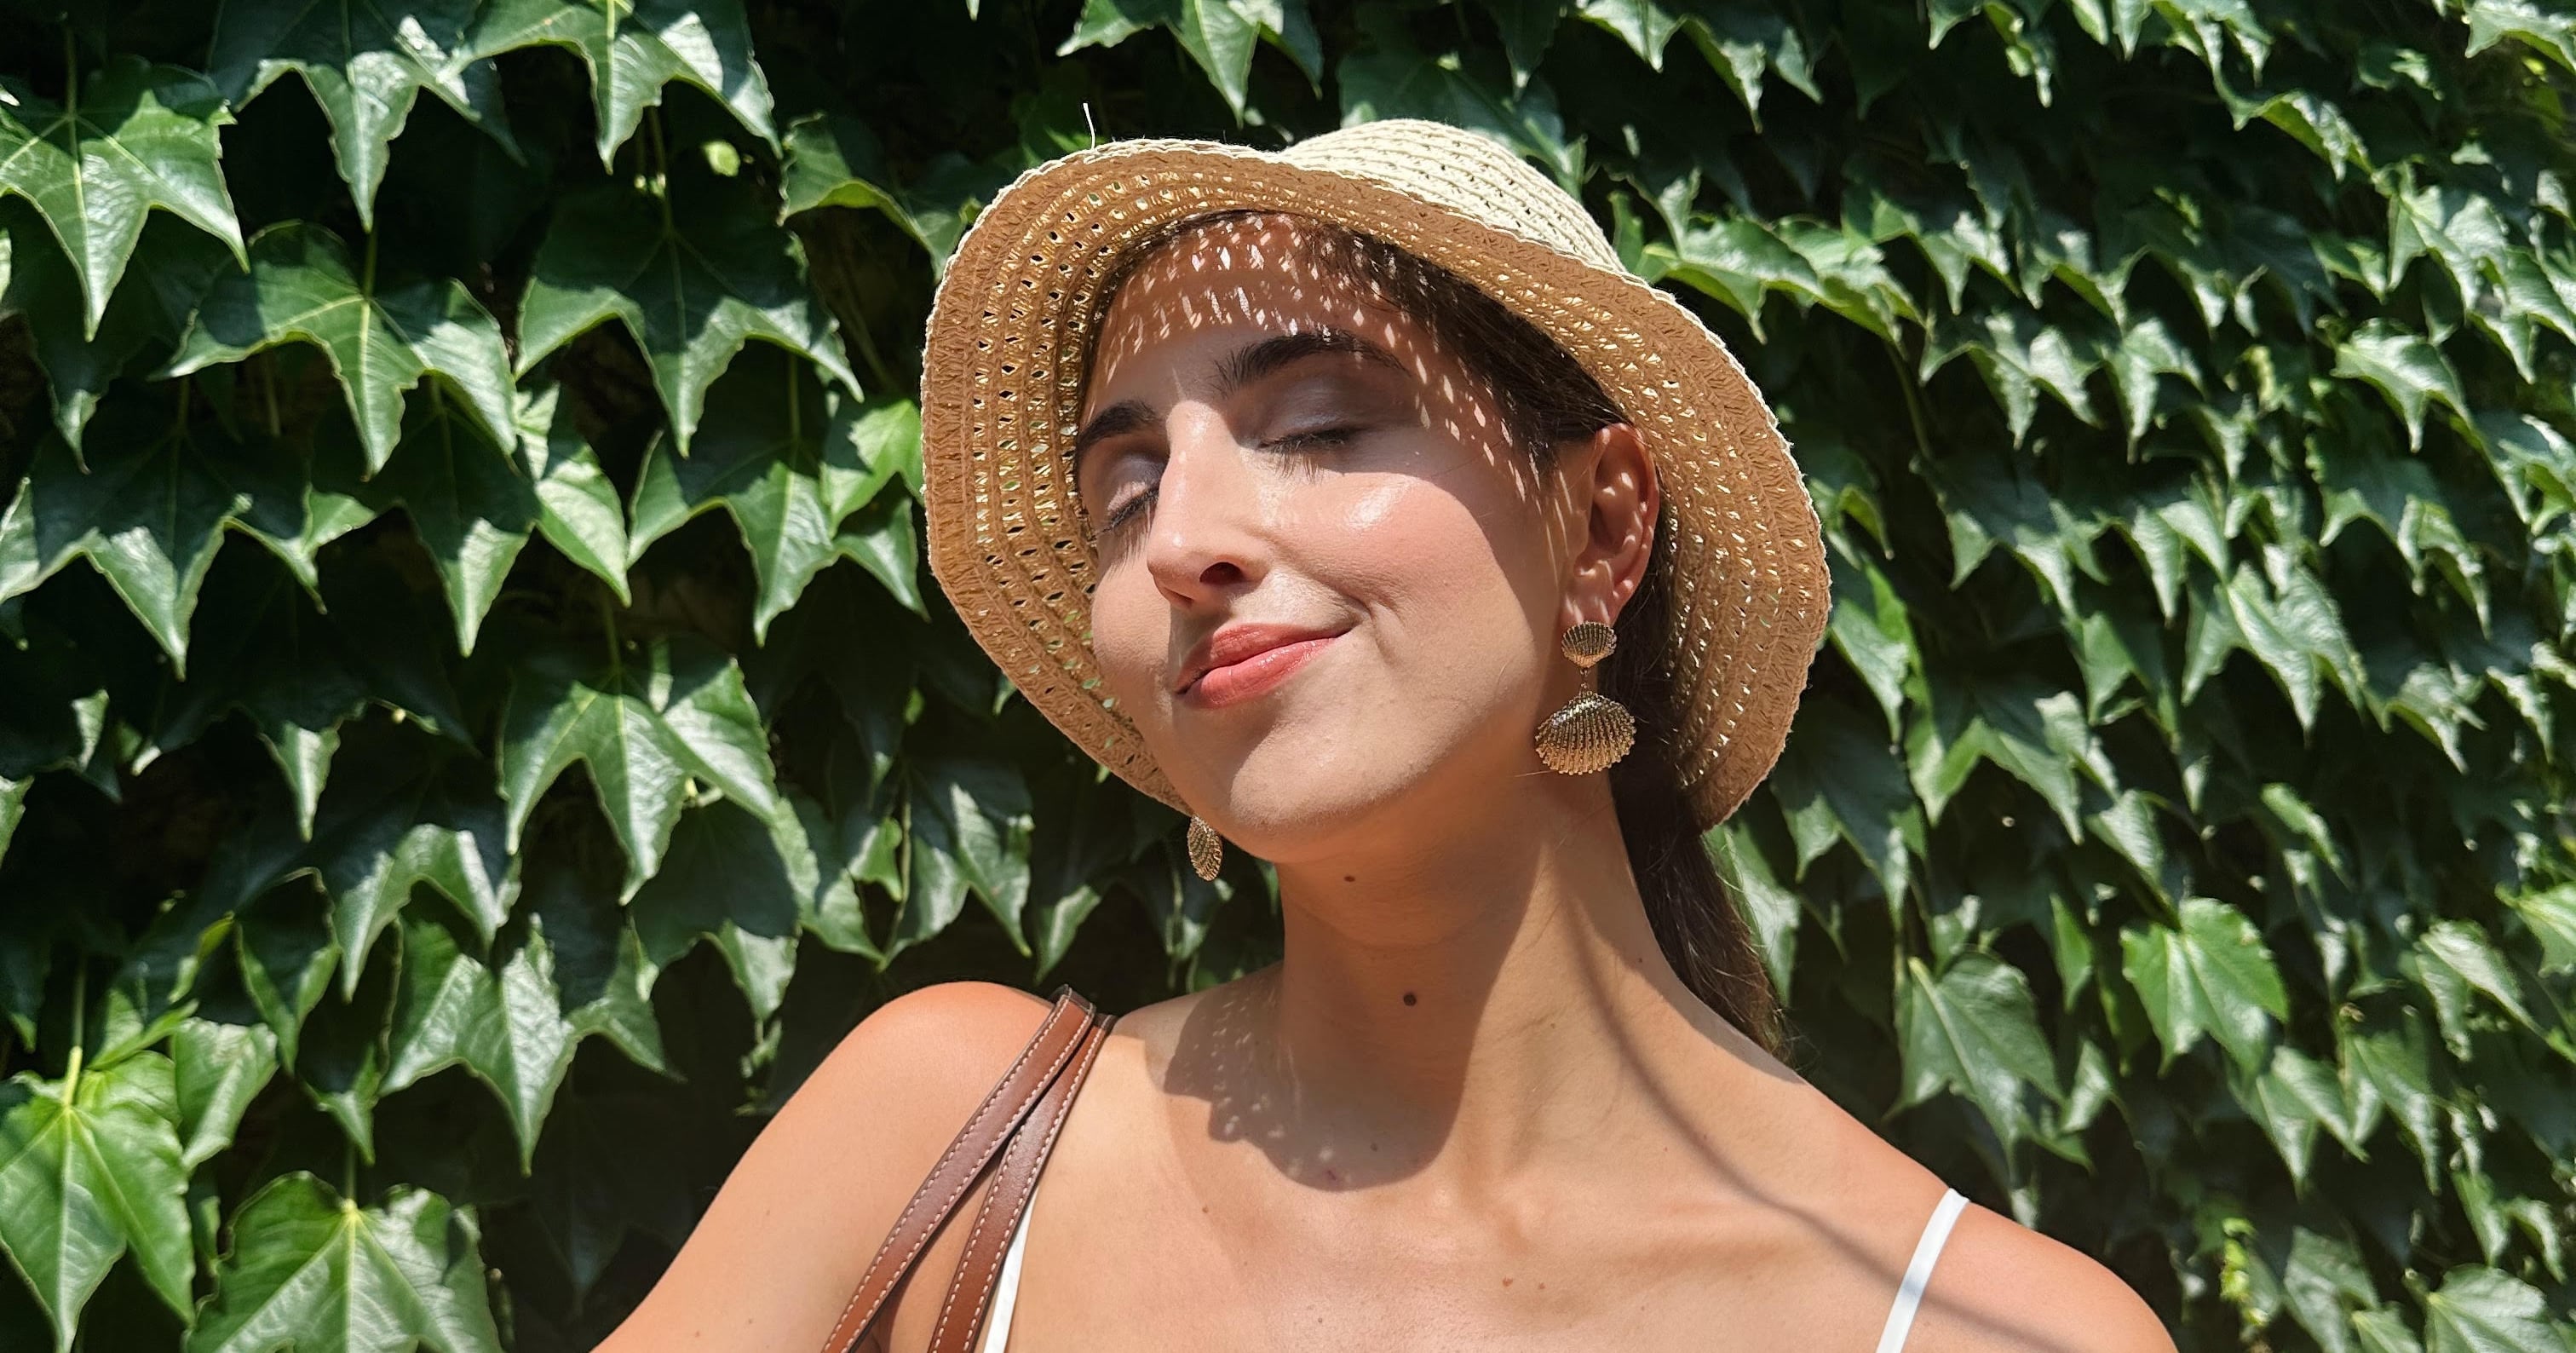 This $25 Straw Bucket Hat Is My Favorite Summer Accessory